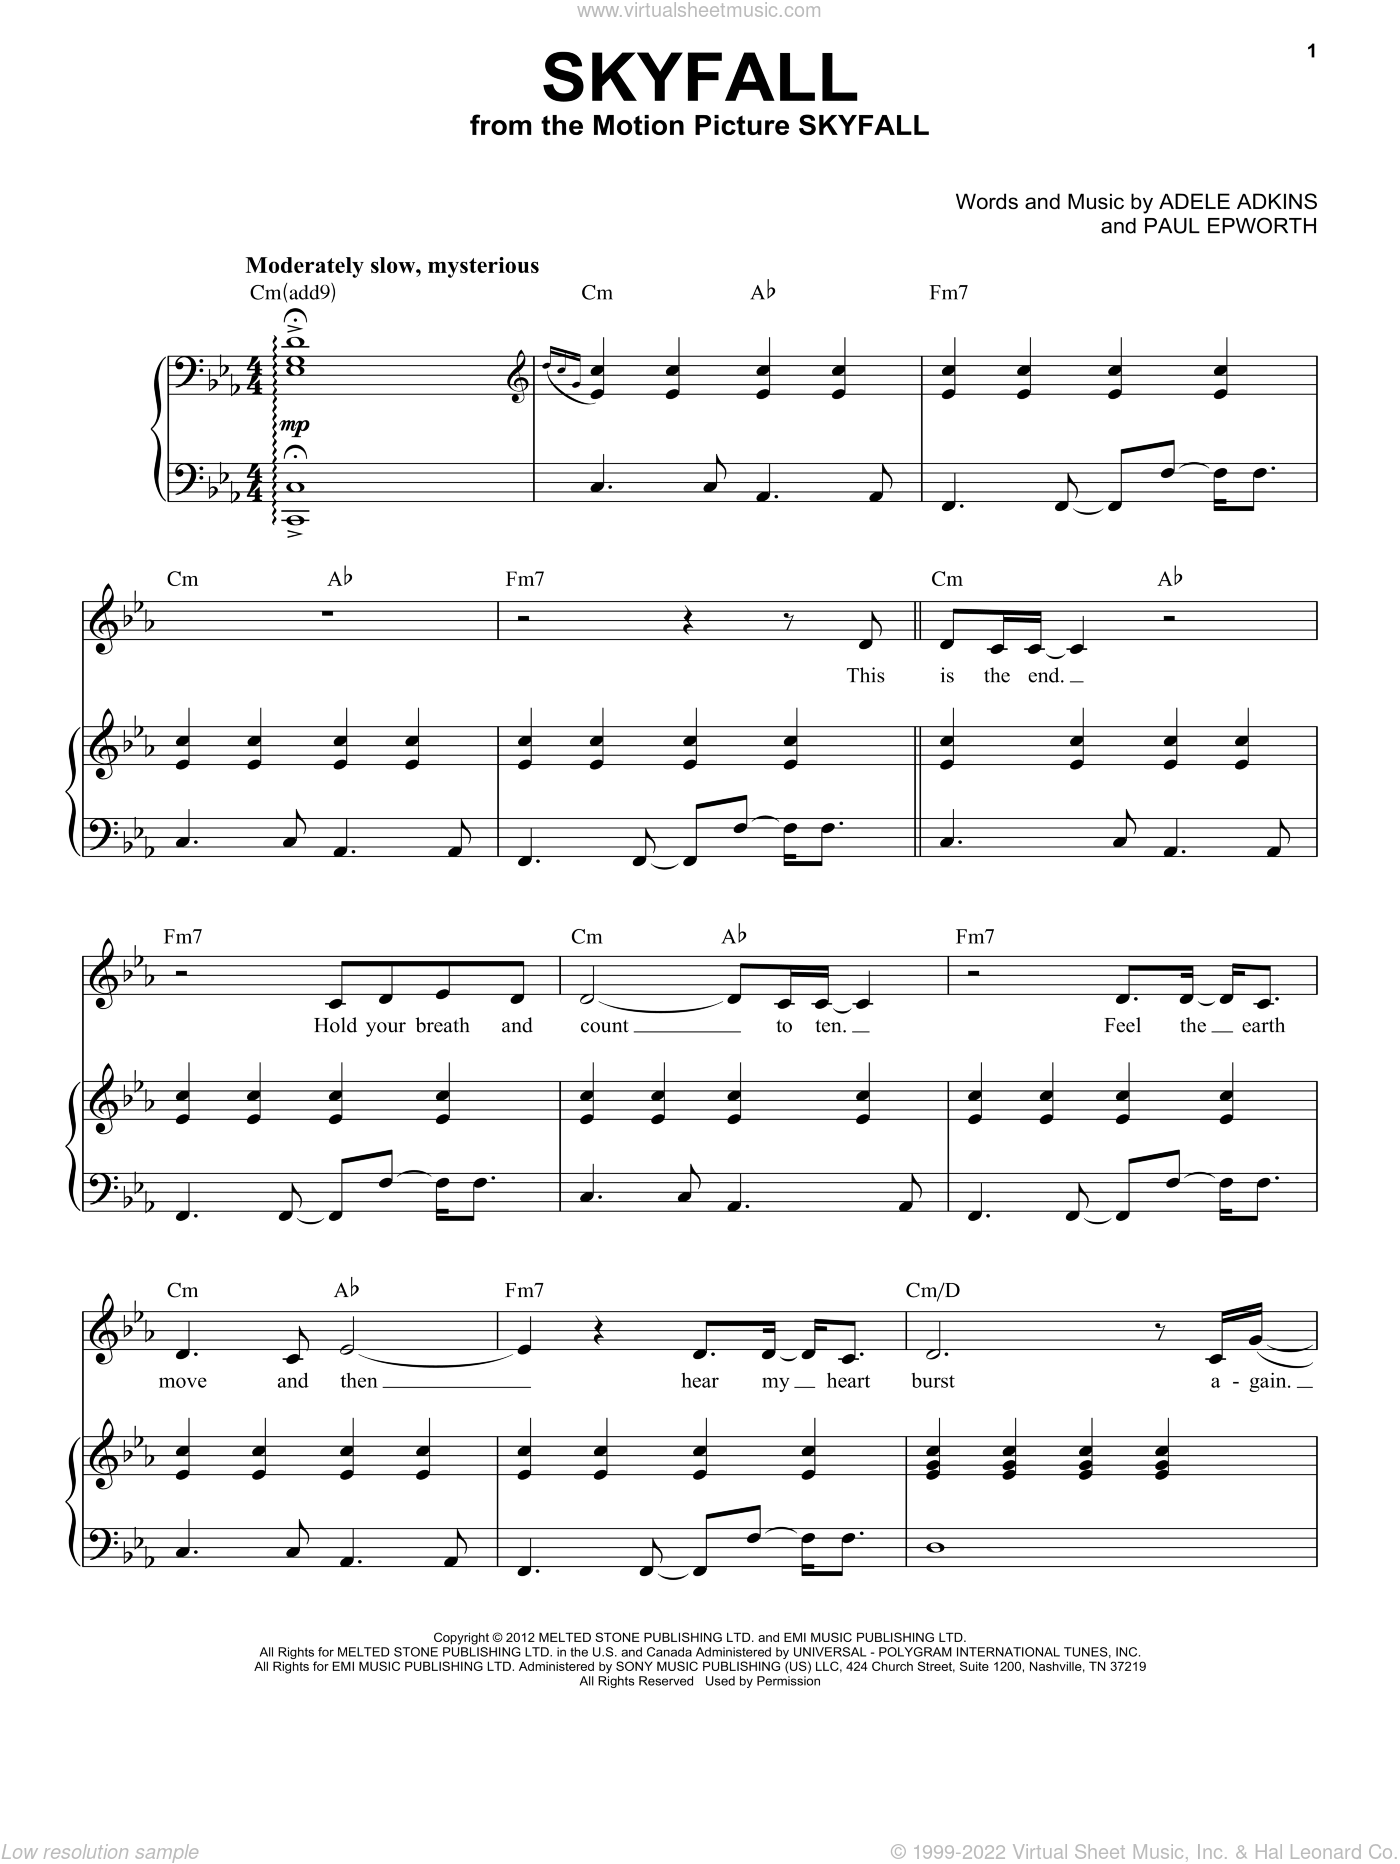 Adele - Skyfall sheet music for voice and piano (PDF-interactive) .